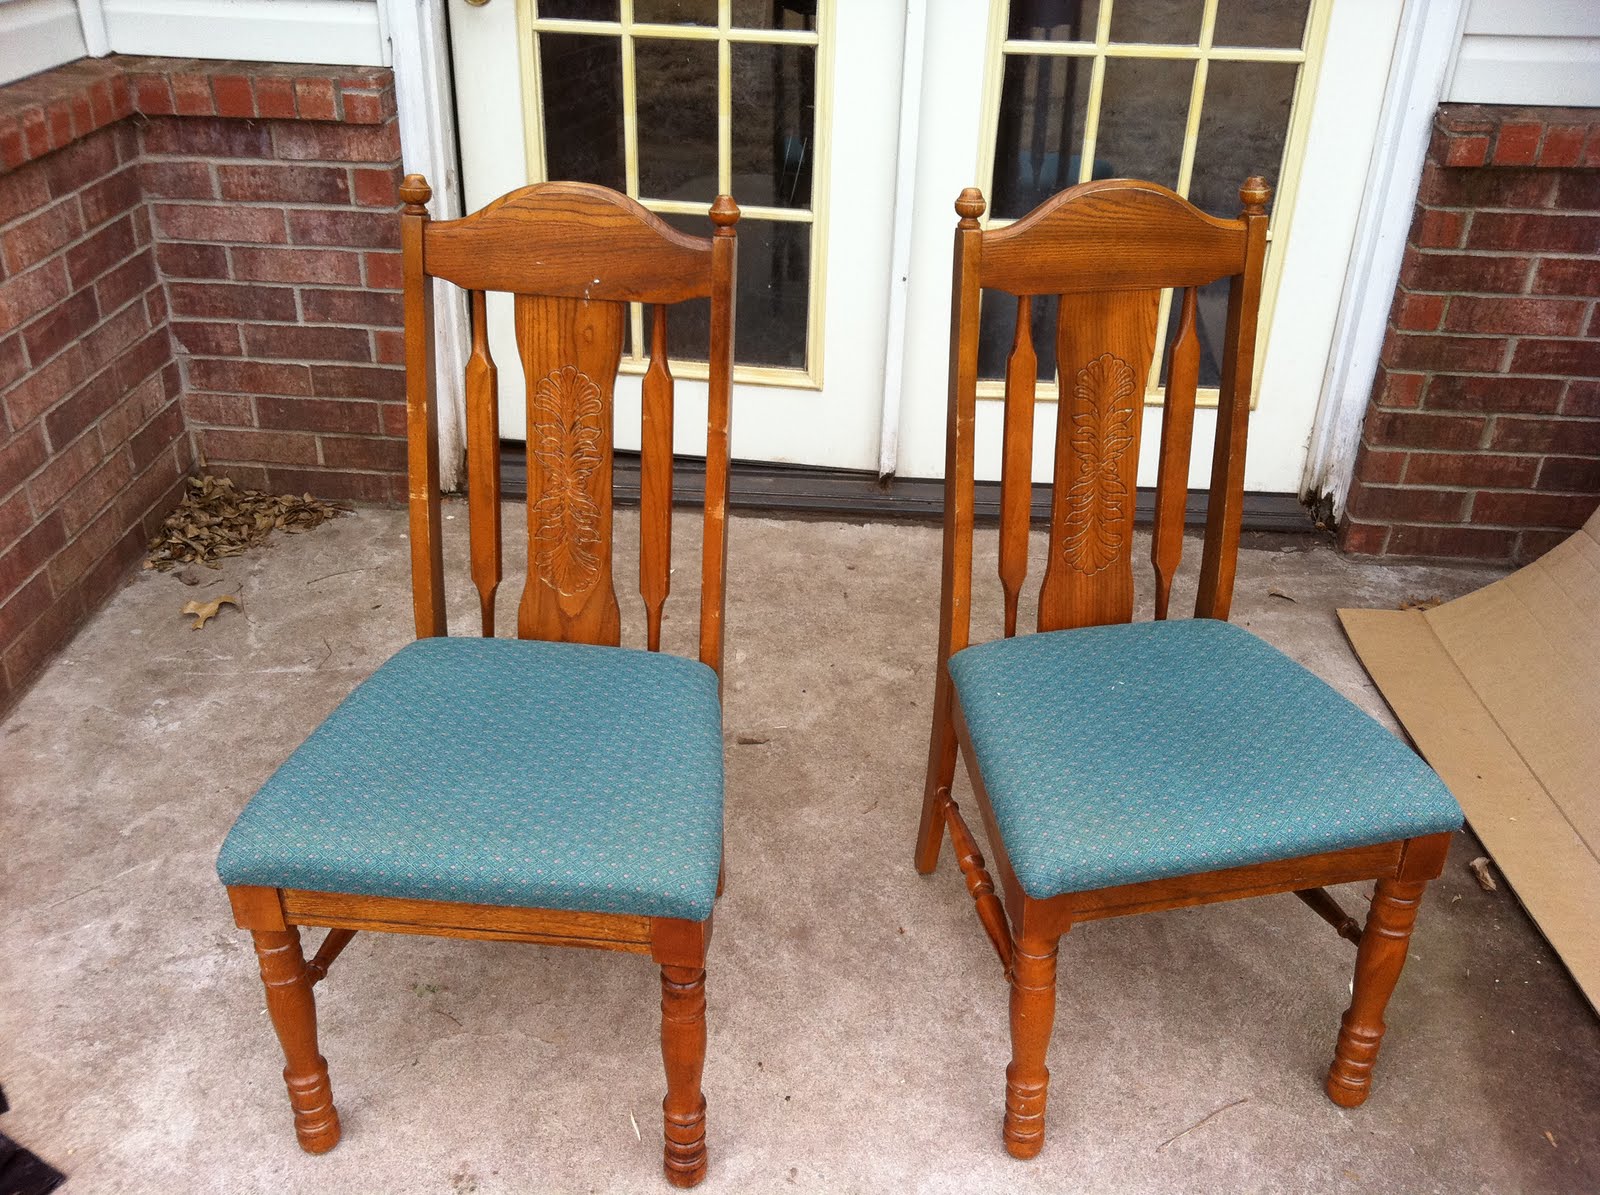 Dining Room Chairs Repaired With Glue